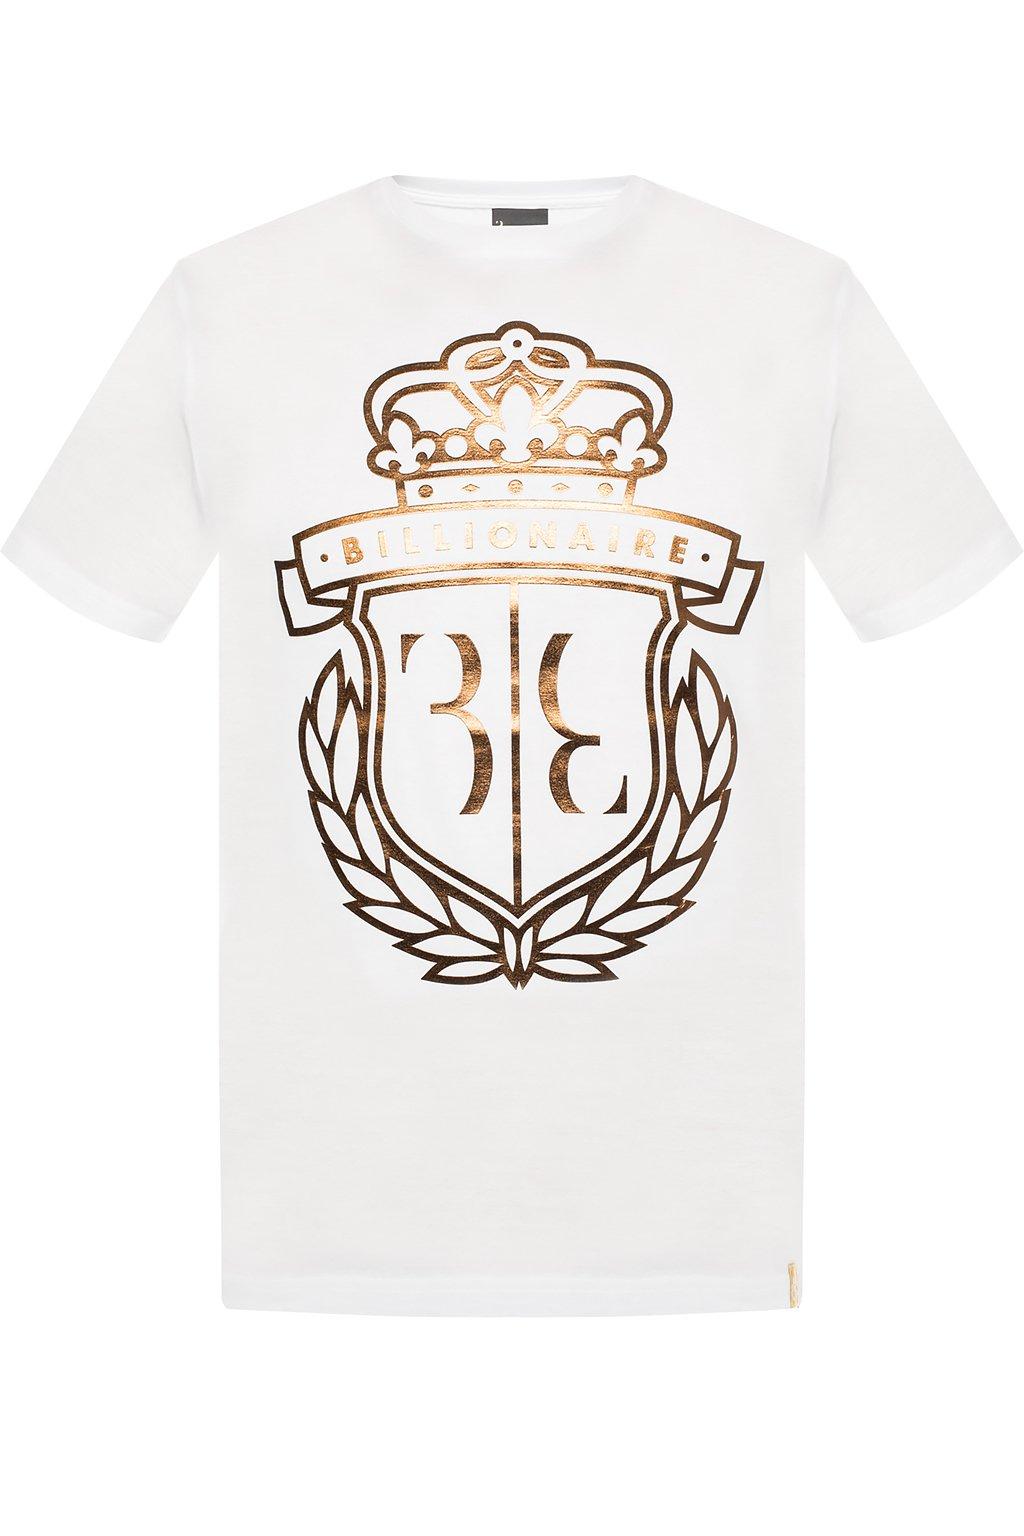 Billionaire Cotton Logo-printed T-shirt in White for Men - Save 13% - Lyst